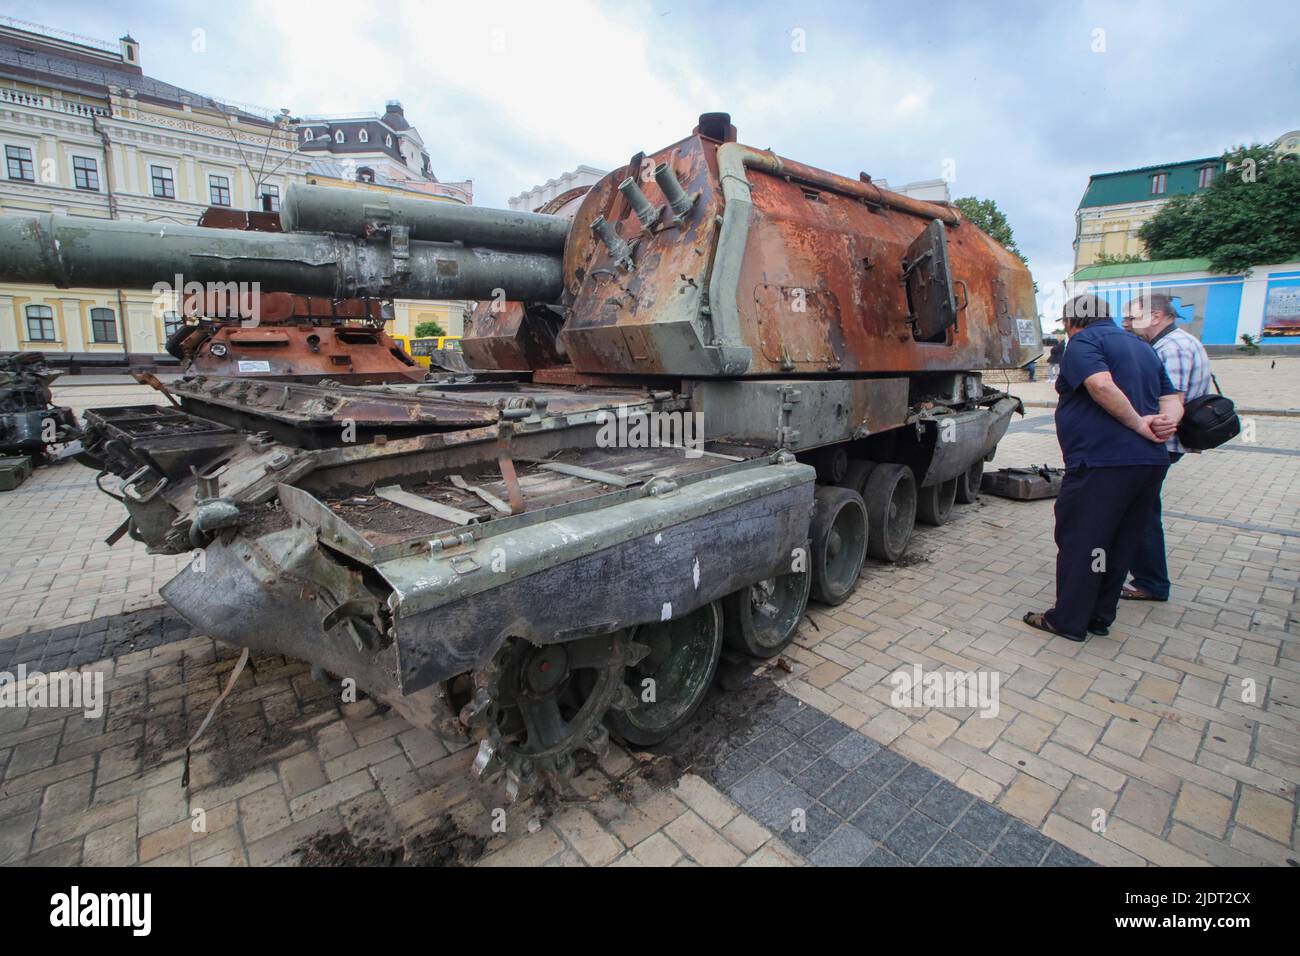 Non Exclusive: KYIV, UKRAINE - MAY 28, 2022 - The exhibition of destroyed Russian military vehicles is situated in Mykhailivska Square, Kyiv, capital Stock Photo